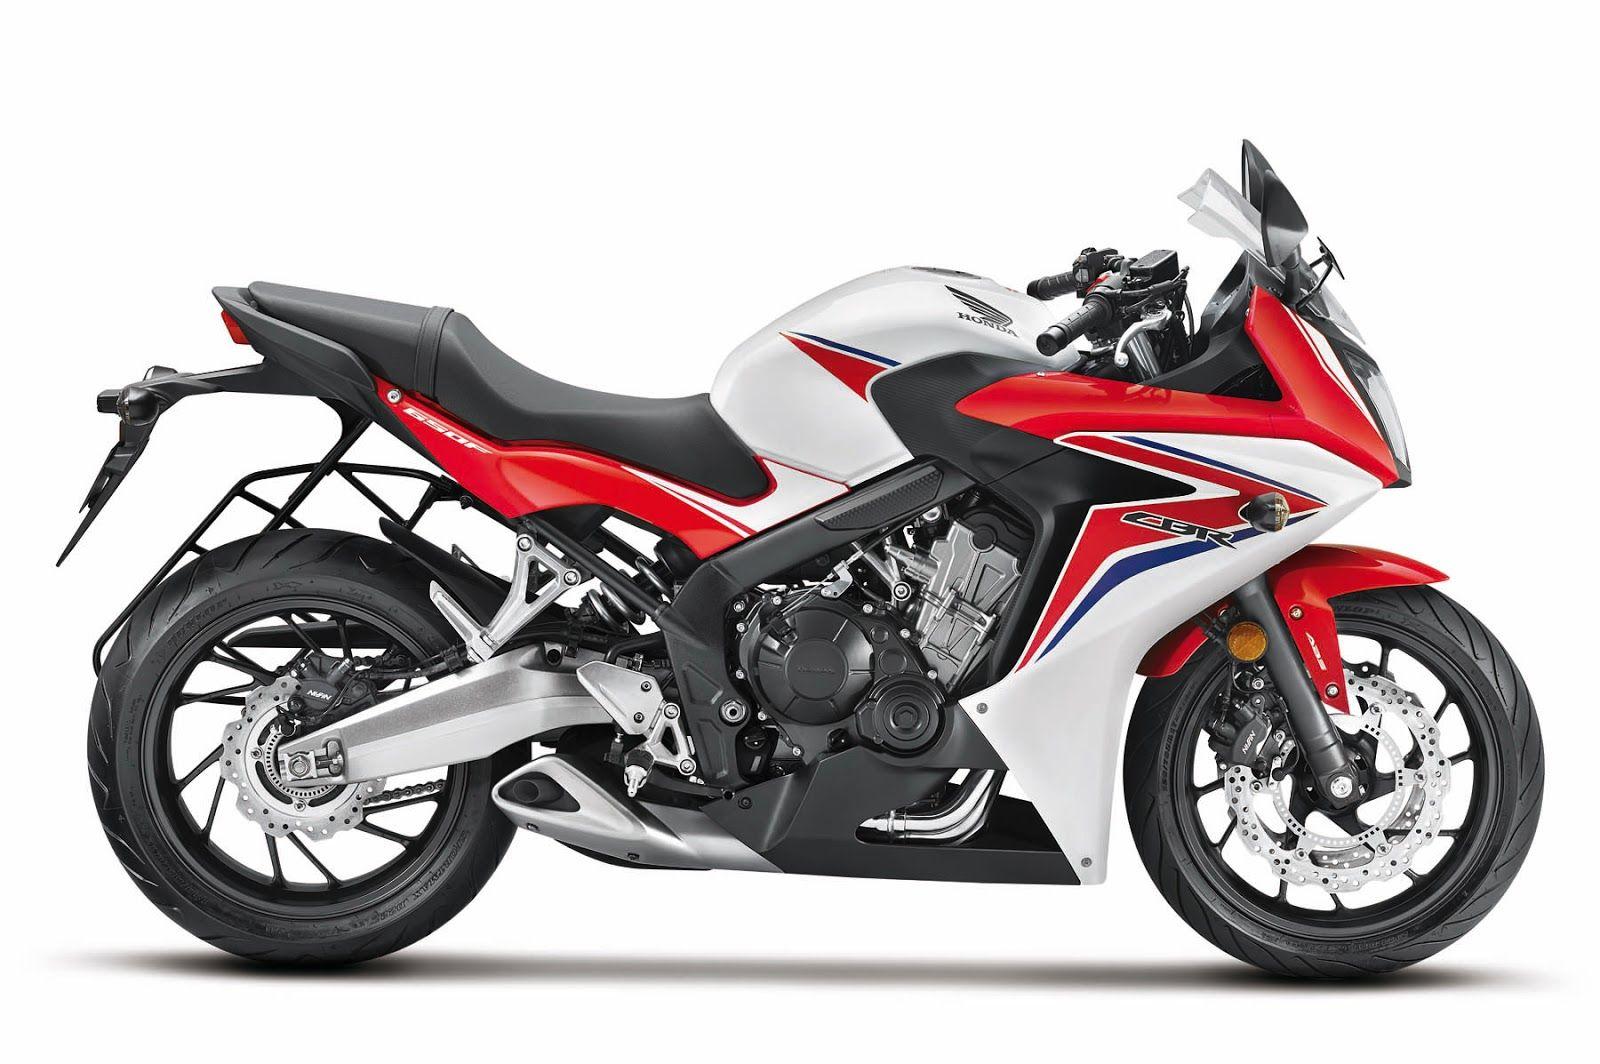 2016 17 First Look Honda CBR650F ABS HD Image Latest New